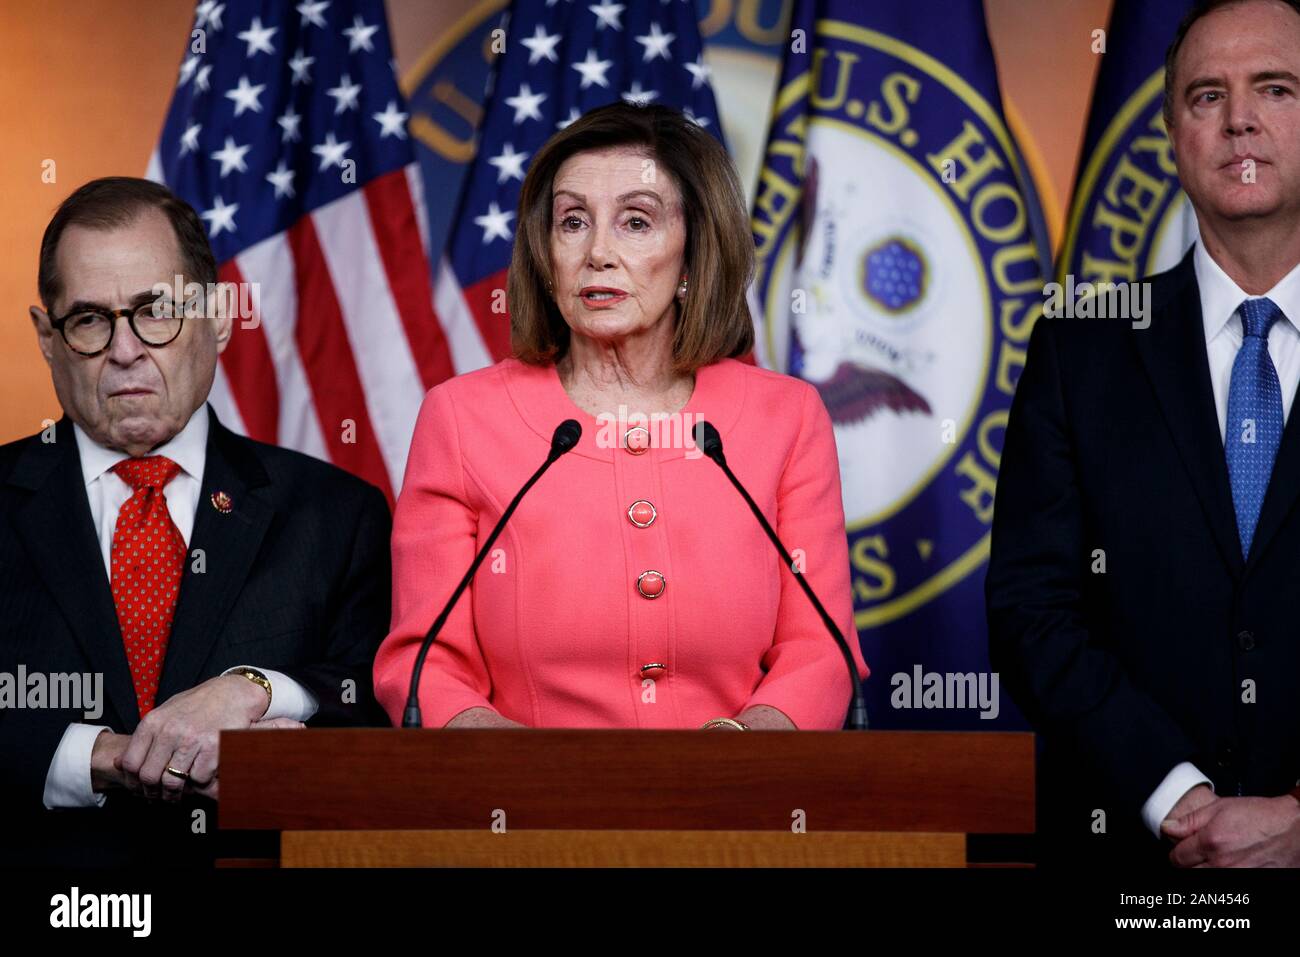 Washington, USA. 15th Jan, 2020. U.S. House Speaker Nancy Pelosi (C) speaks during a press conference in Washington, DC, the United States, on Jan. 15, 2020. The U.S. House of Representatives officially sent impeachment articles against President Donald Trump to the Senate on Wednesday evening to allow a trial to get underway. Credit: Ting Shen/Xinhua/Alamy Live News Stock Photo